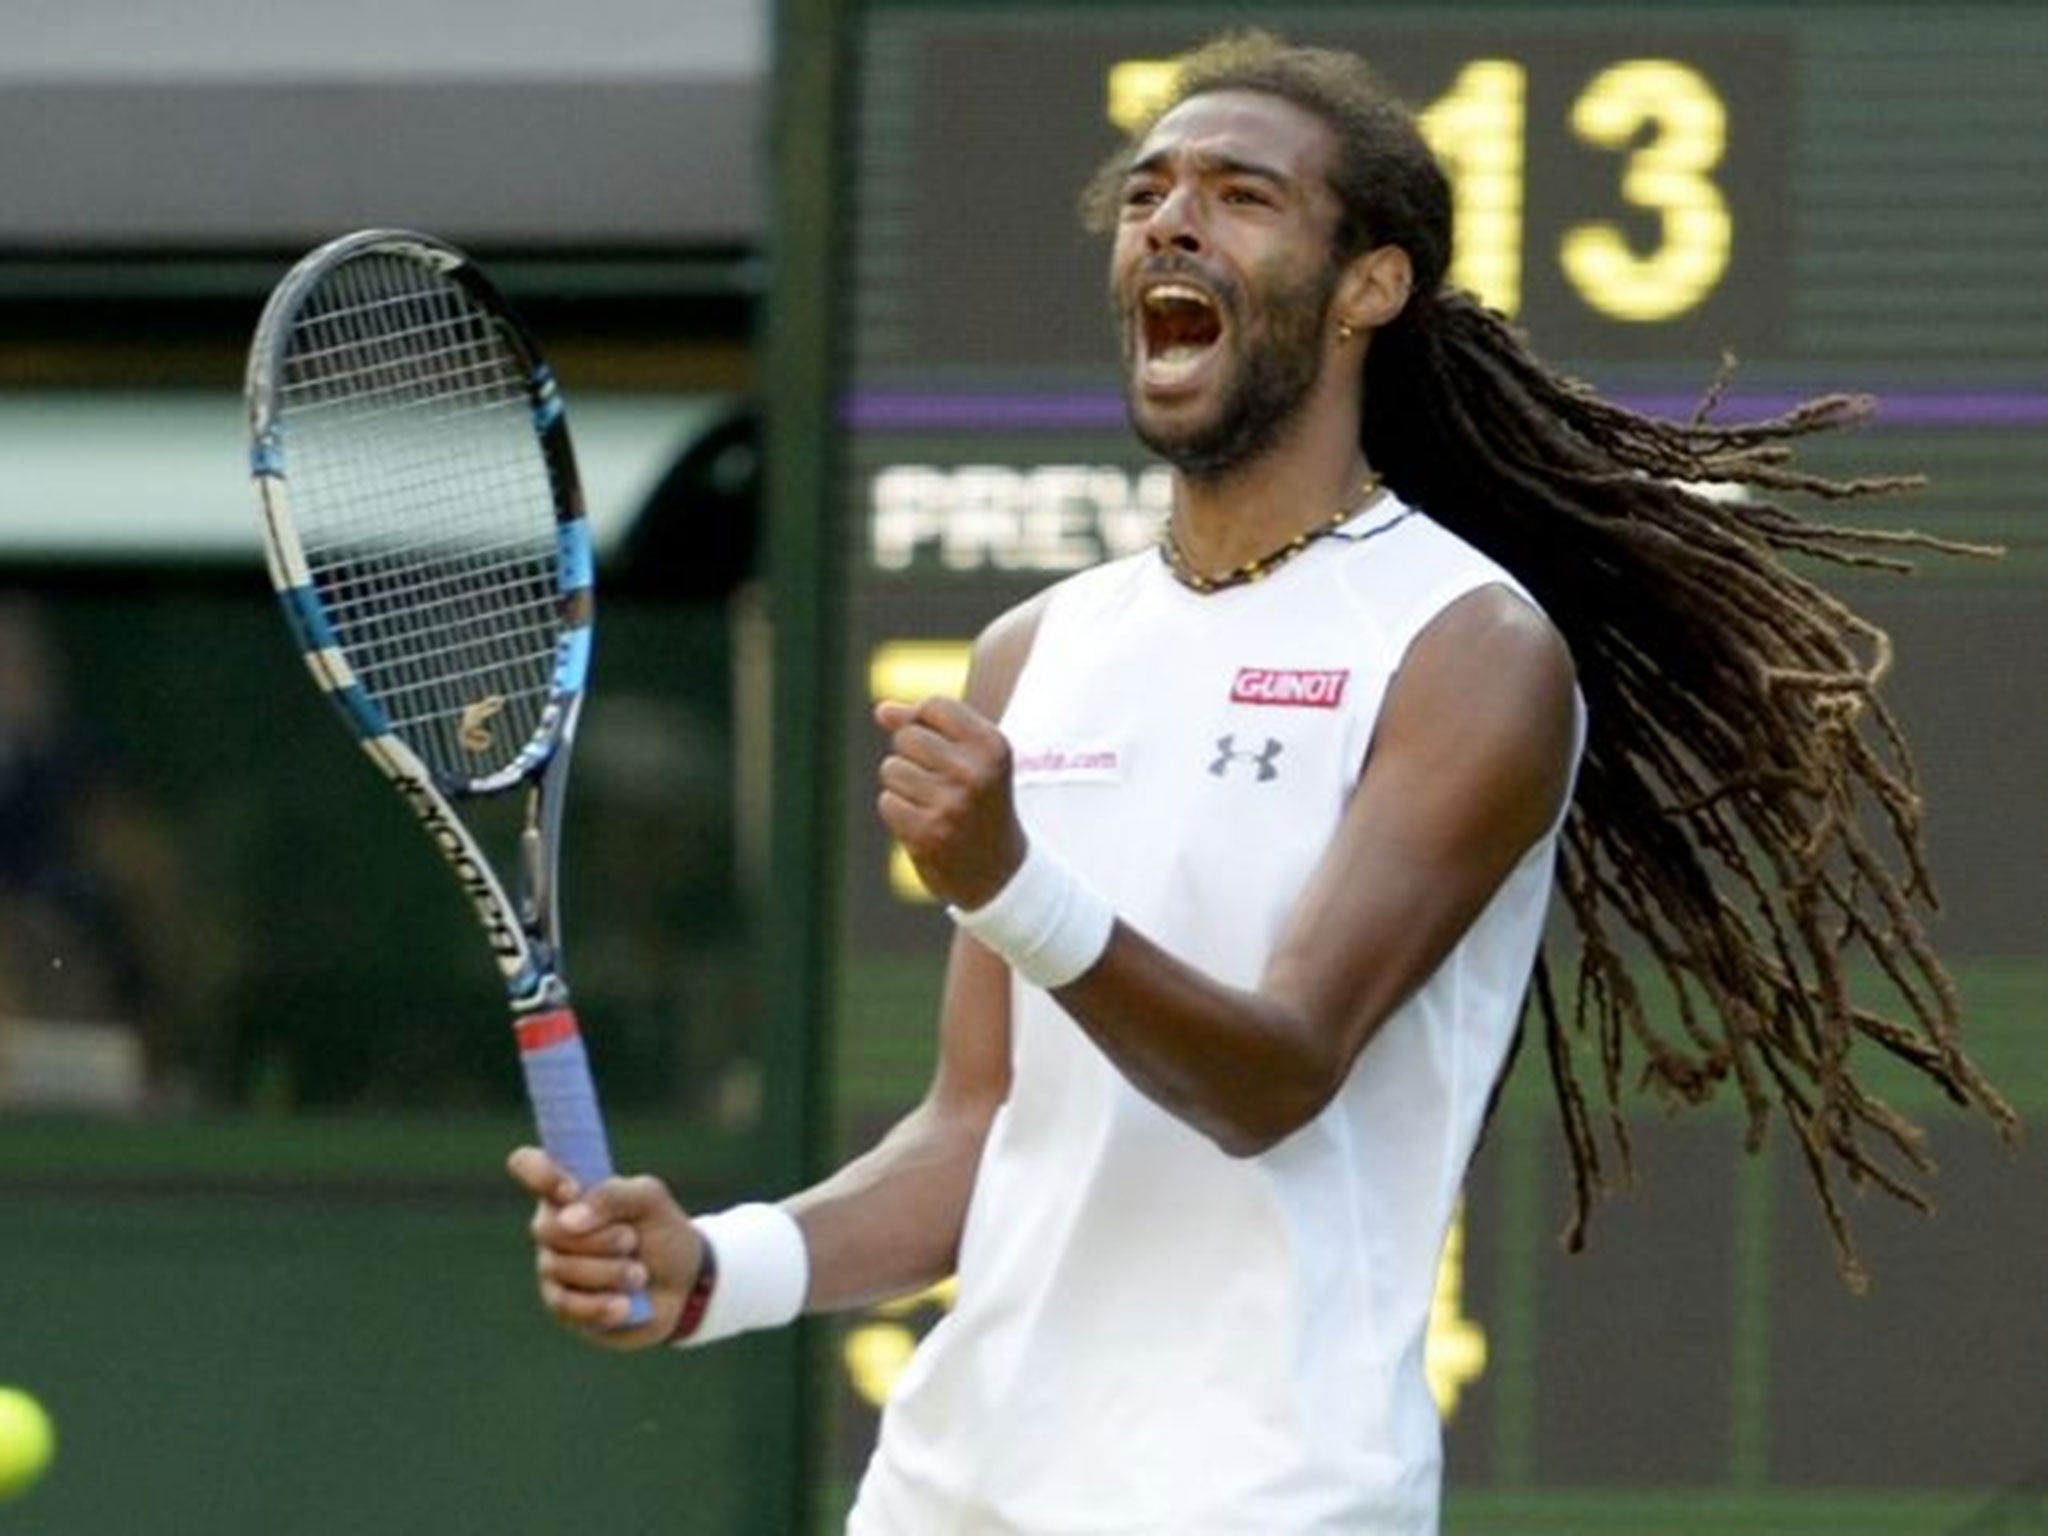 Dustin Brown of Germany in action against Rafael Nadal of Spain during their second round match for the Wimbledon Championships at the All England Lawn Tennis Club, in London, Britain, 02 July 2015.  